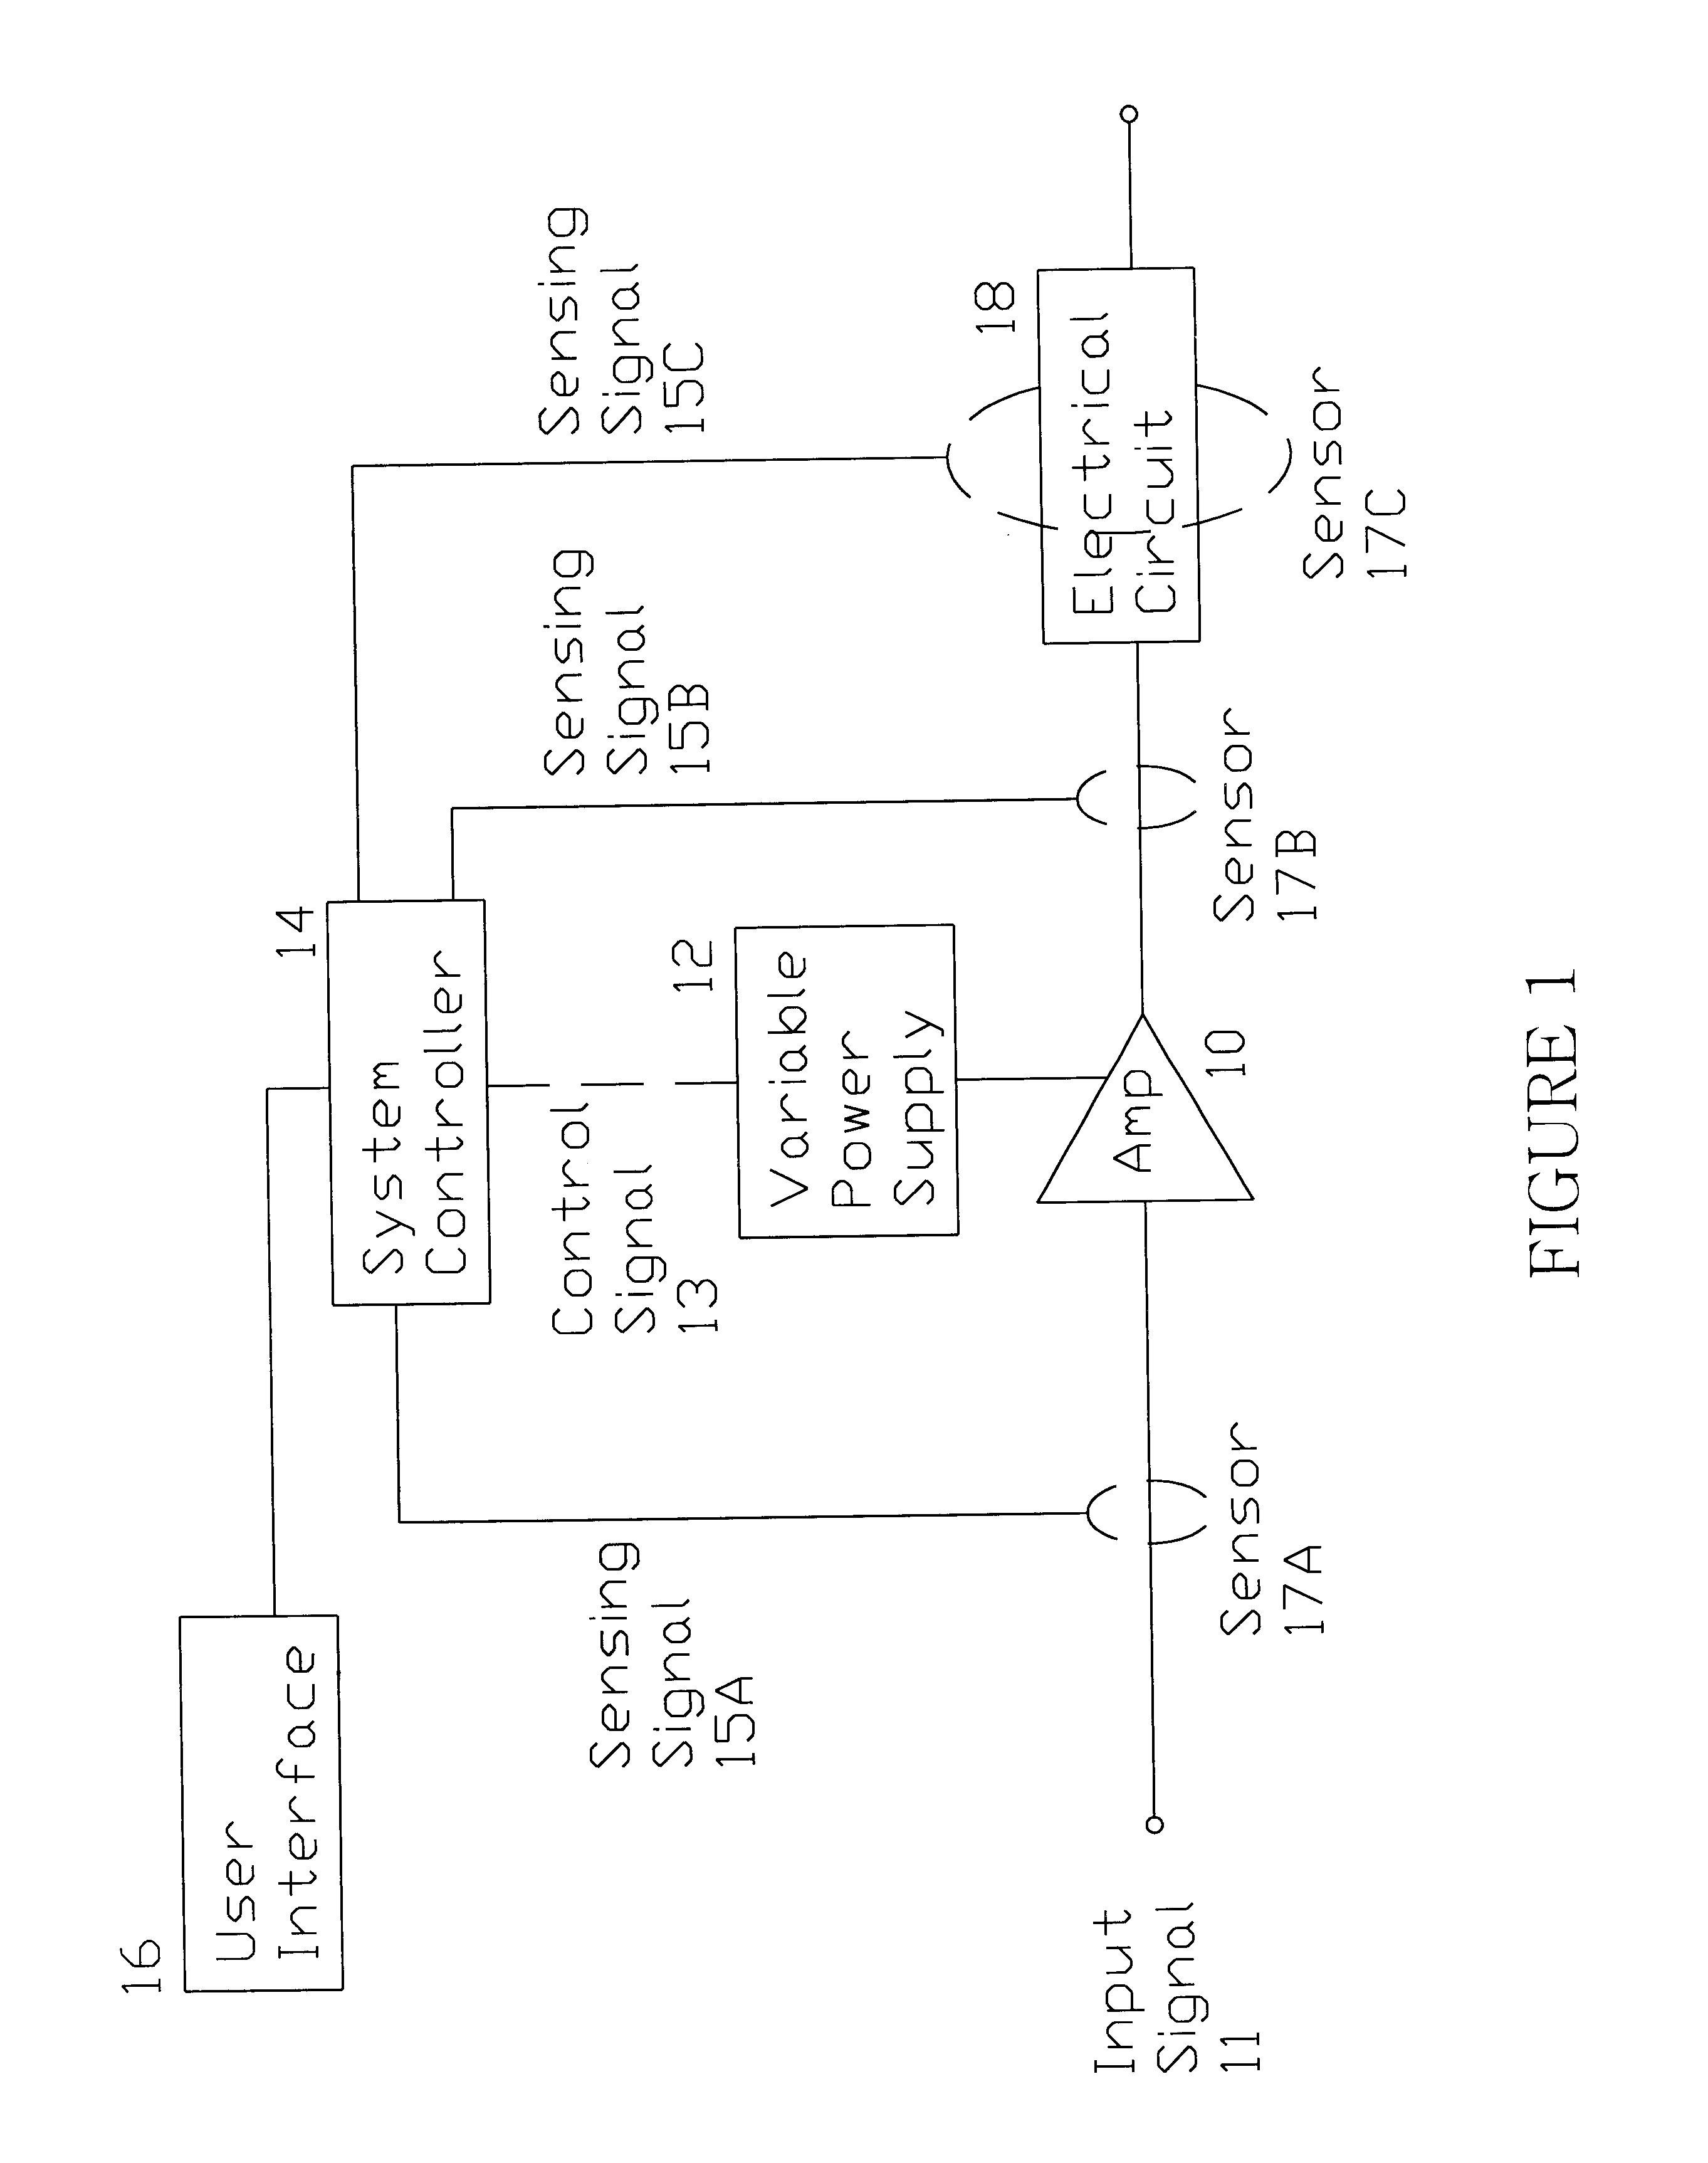 System and method for minimizing dissipation in RF power amplifiers